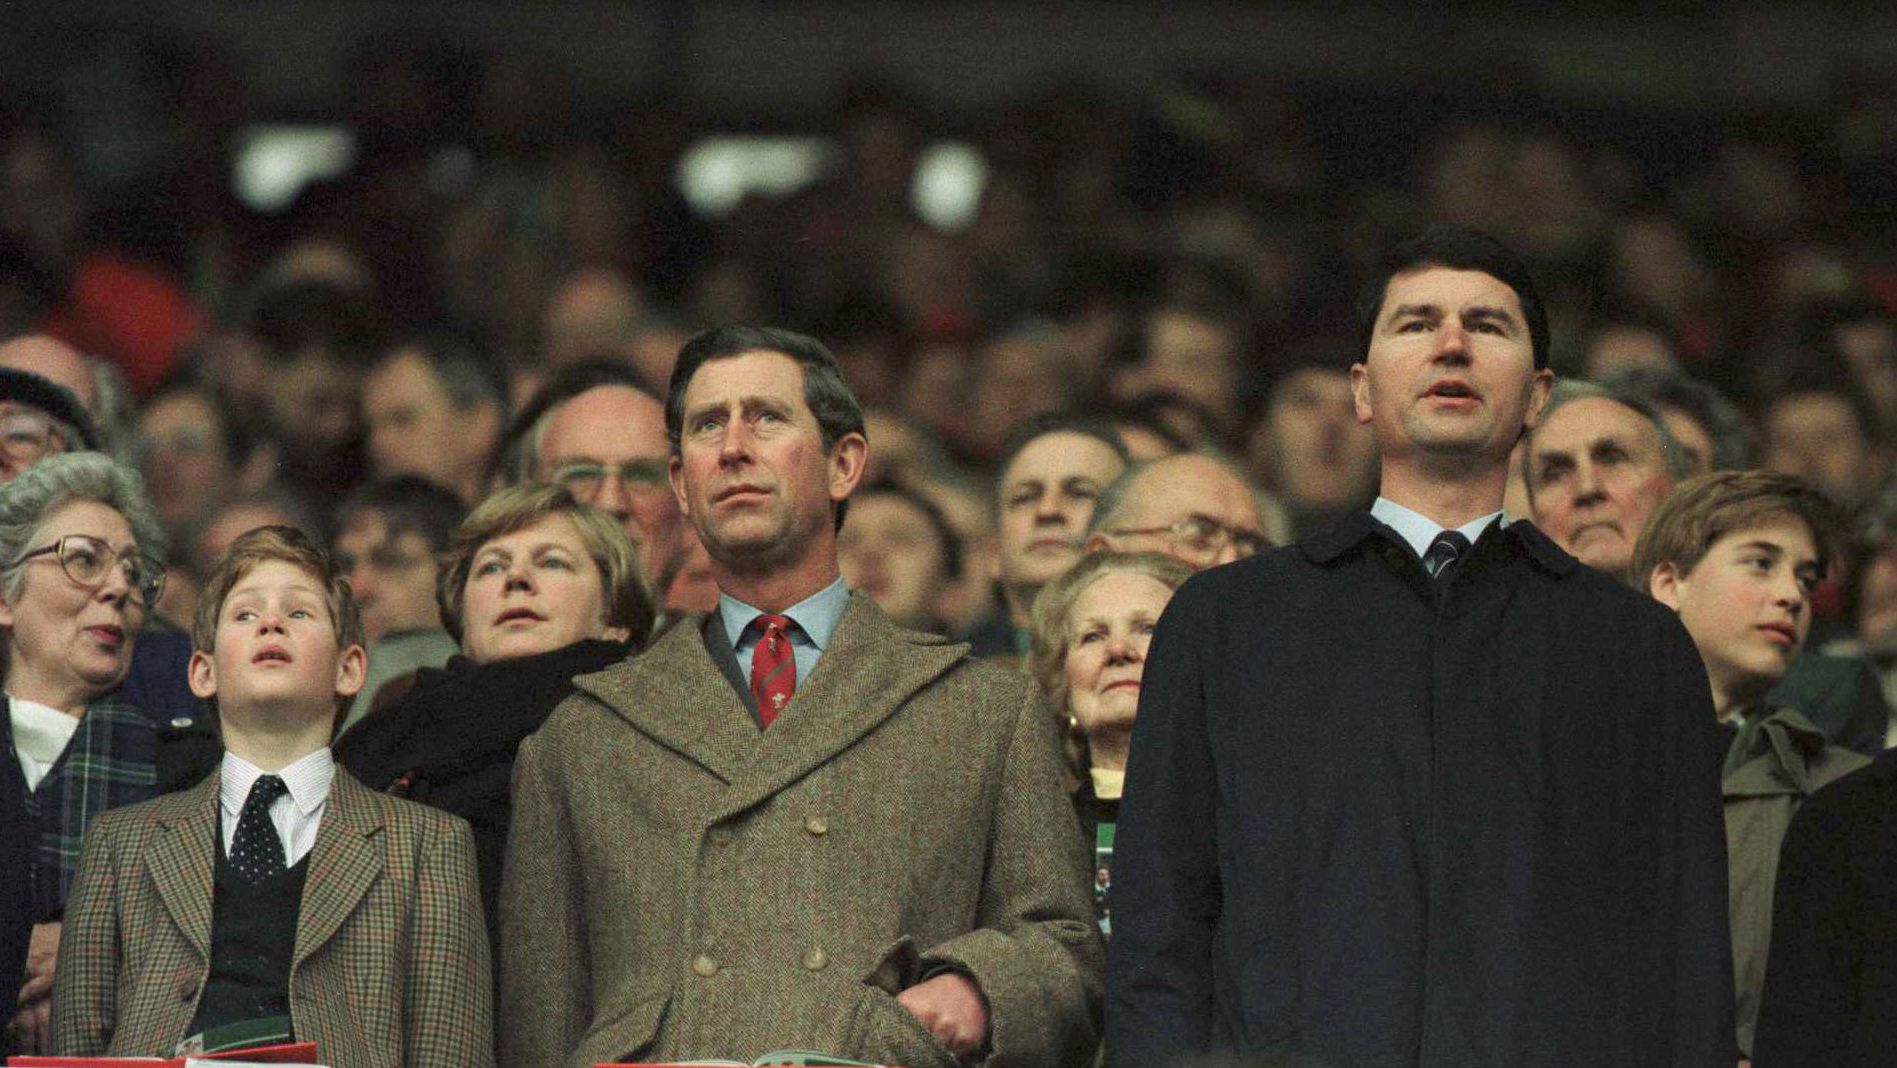 Prince Charles and Prince Harry, at left, stand for anthems as Prince William, right, looks around during the Five Nations rugby championship in 1996.